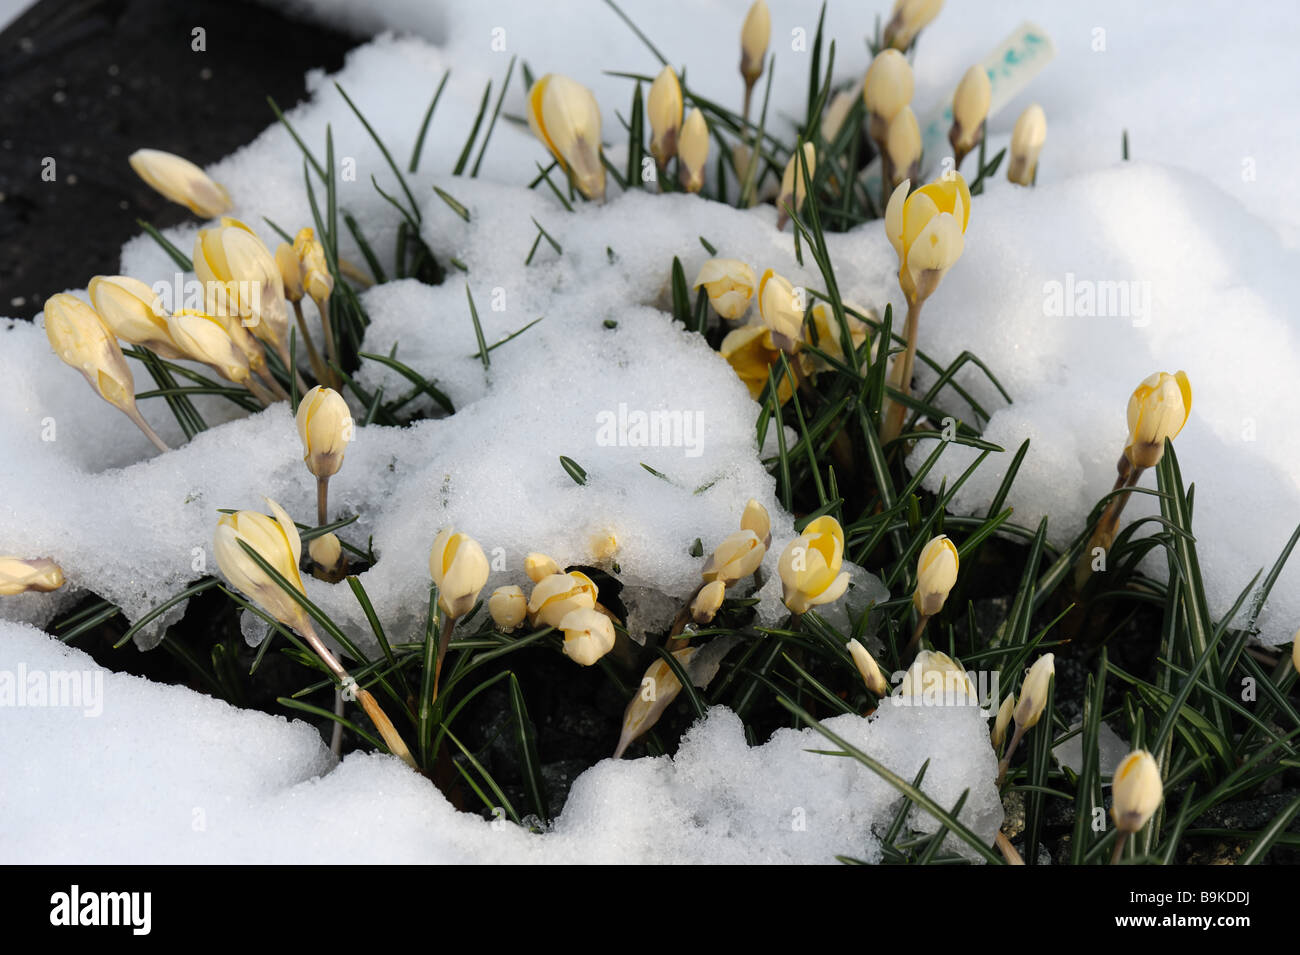 Crocus chrysanthus Ard Schenk flowers exposed through a cover of snow in a garden alpine flower bed Stock Photo